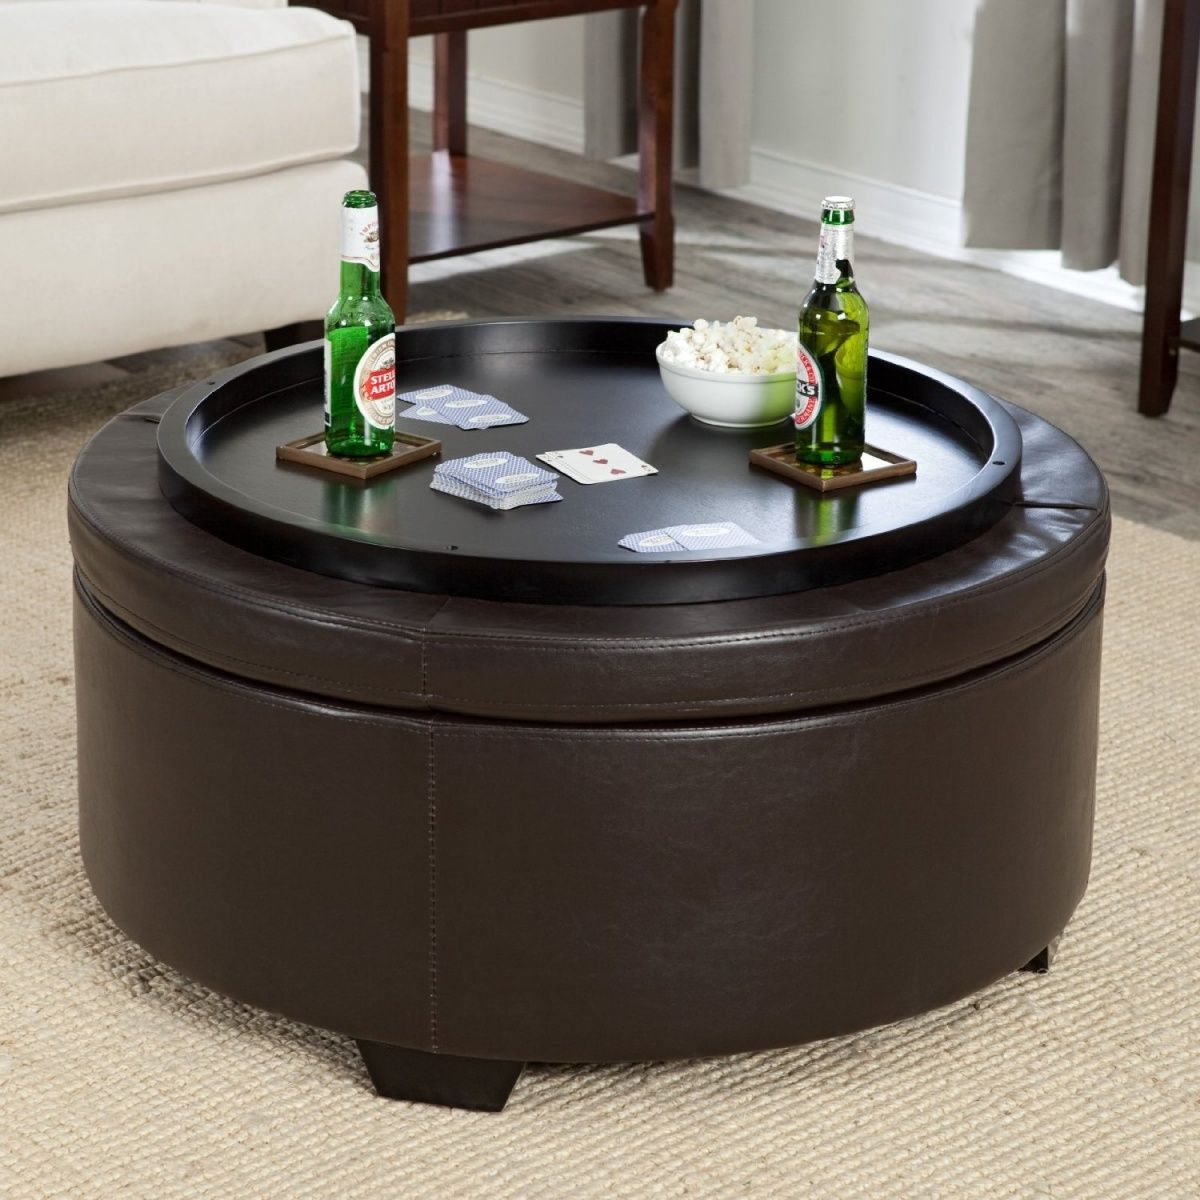 Round Coffee Table Ottoman As Your Best Round Table Round Coffee Table Ottomans Jcpenney Ottoman (View 6 of 10)